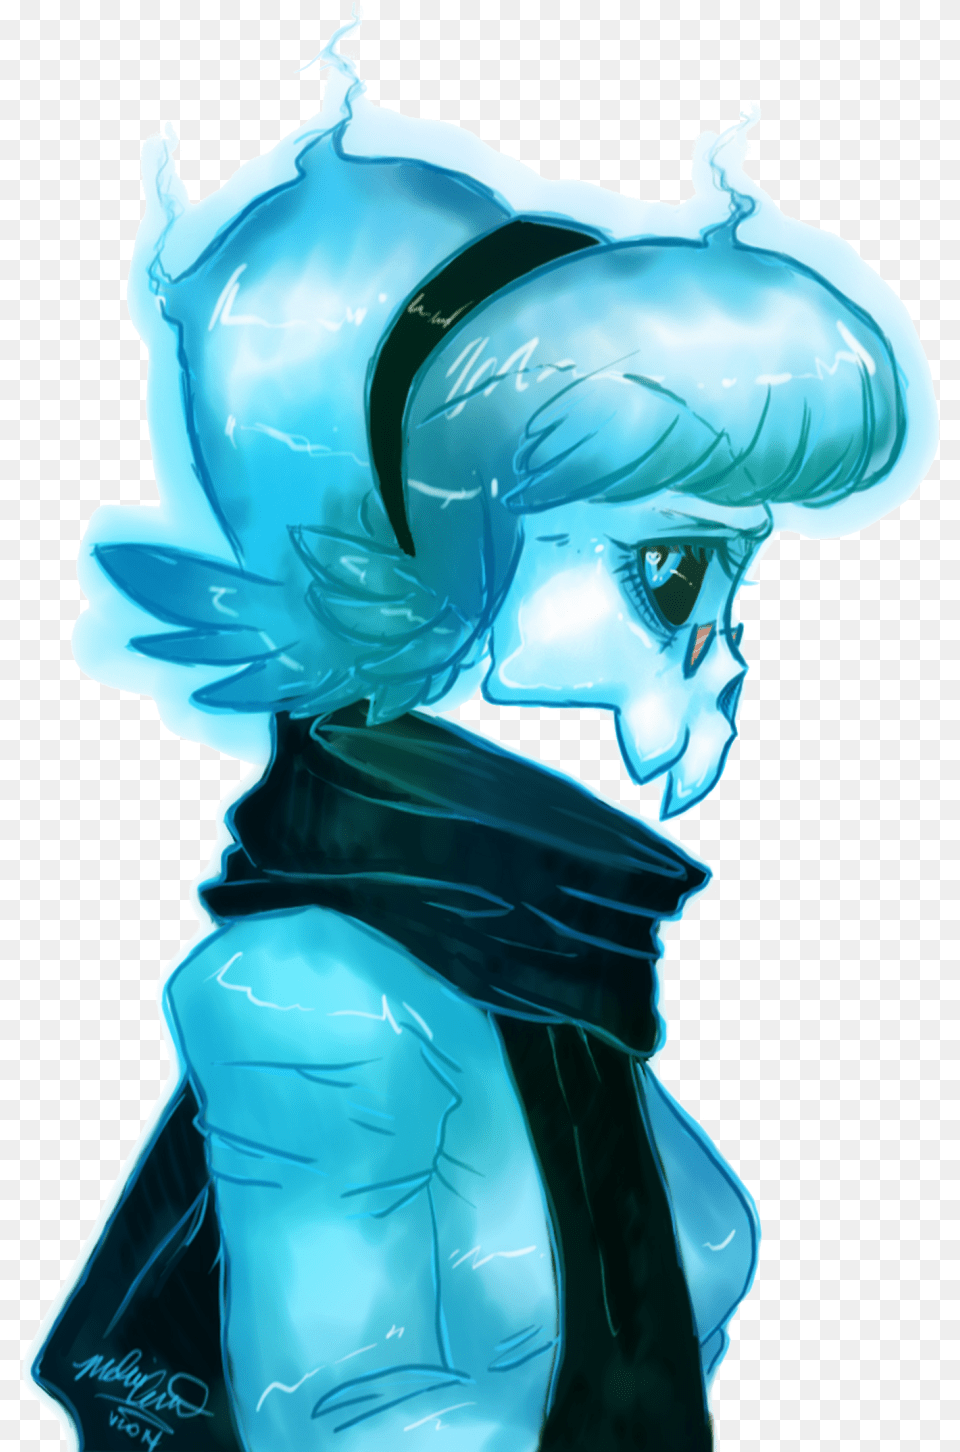 Doodle Vivi Of Mystery Skulls By Maliadoodles In Tumblr Cartoon, Ice, Adult, Person, Female Png